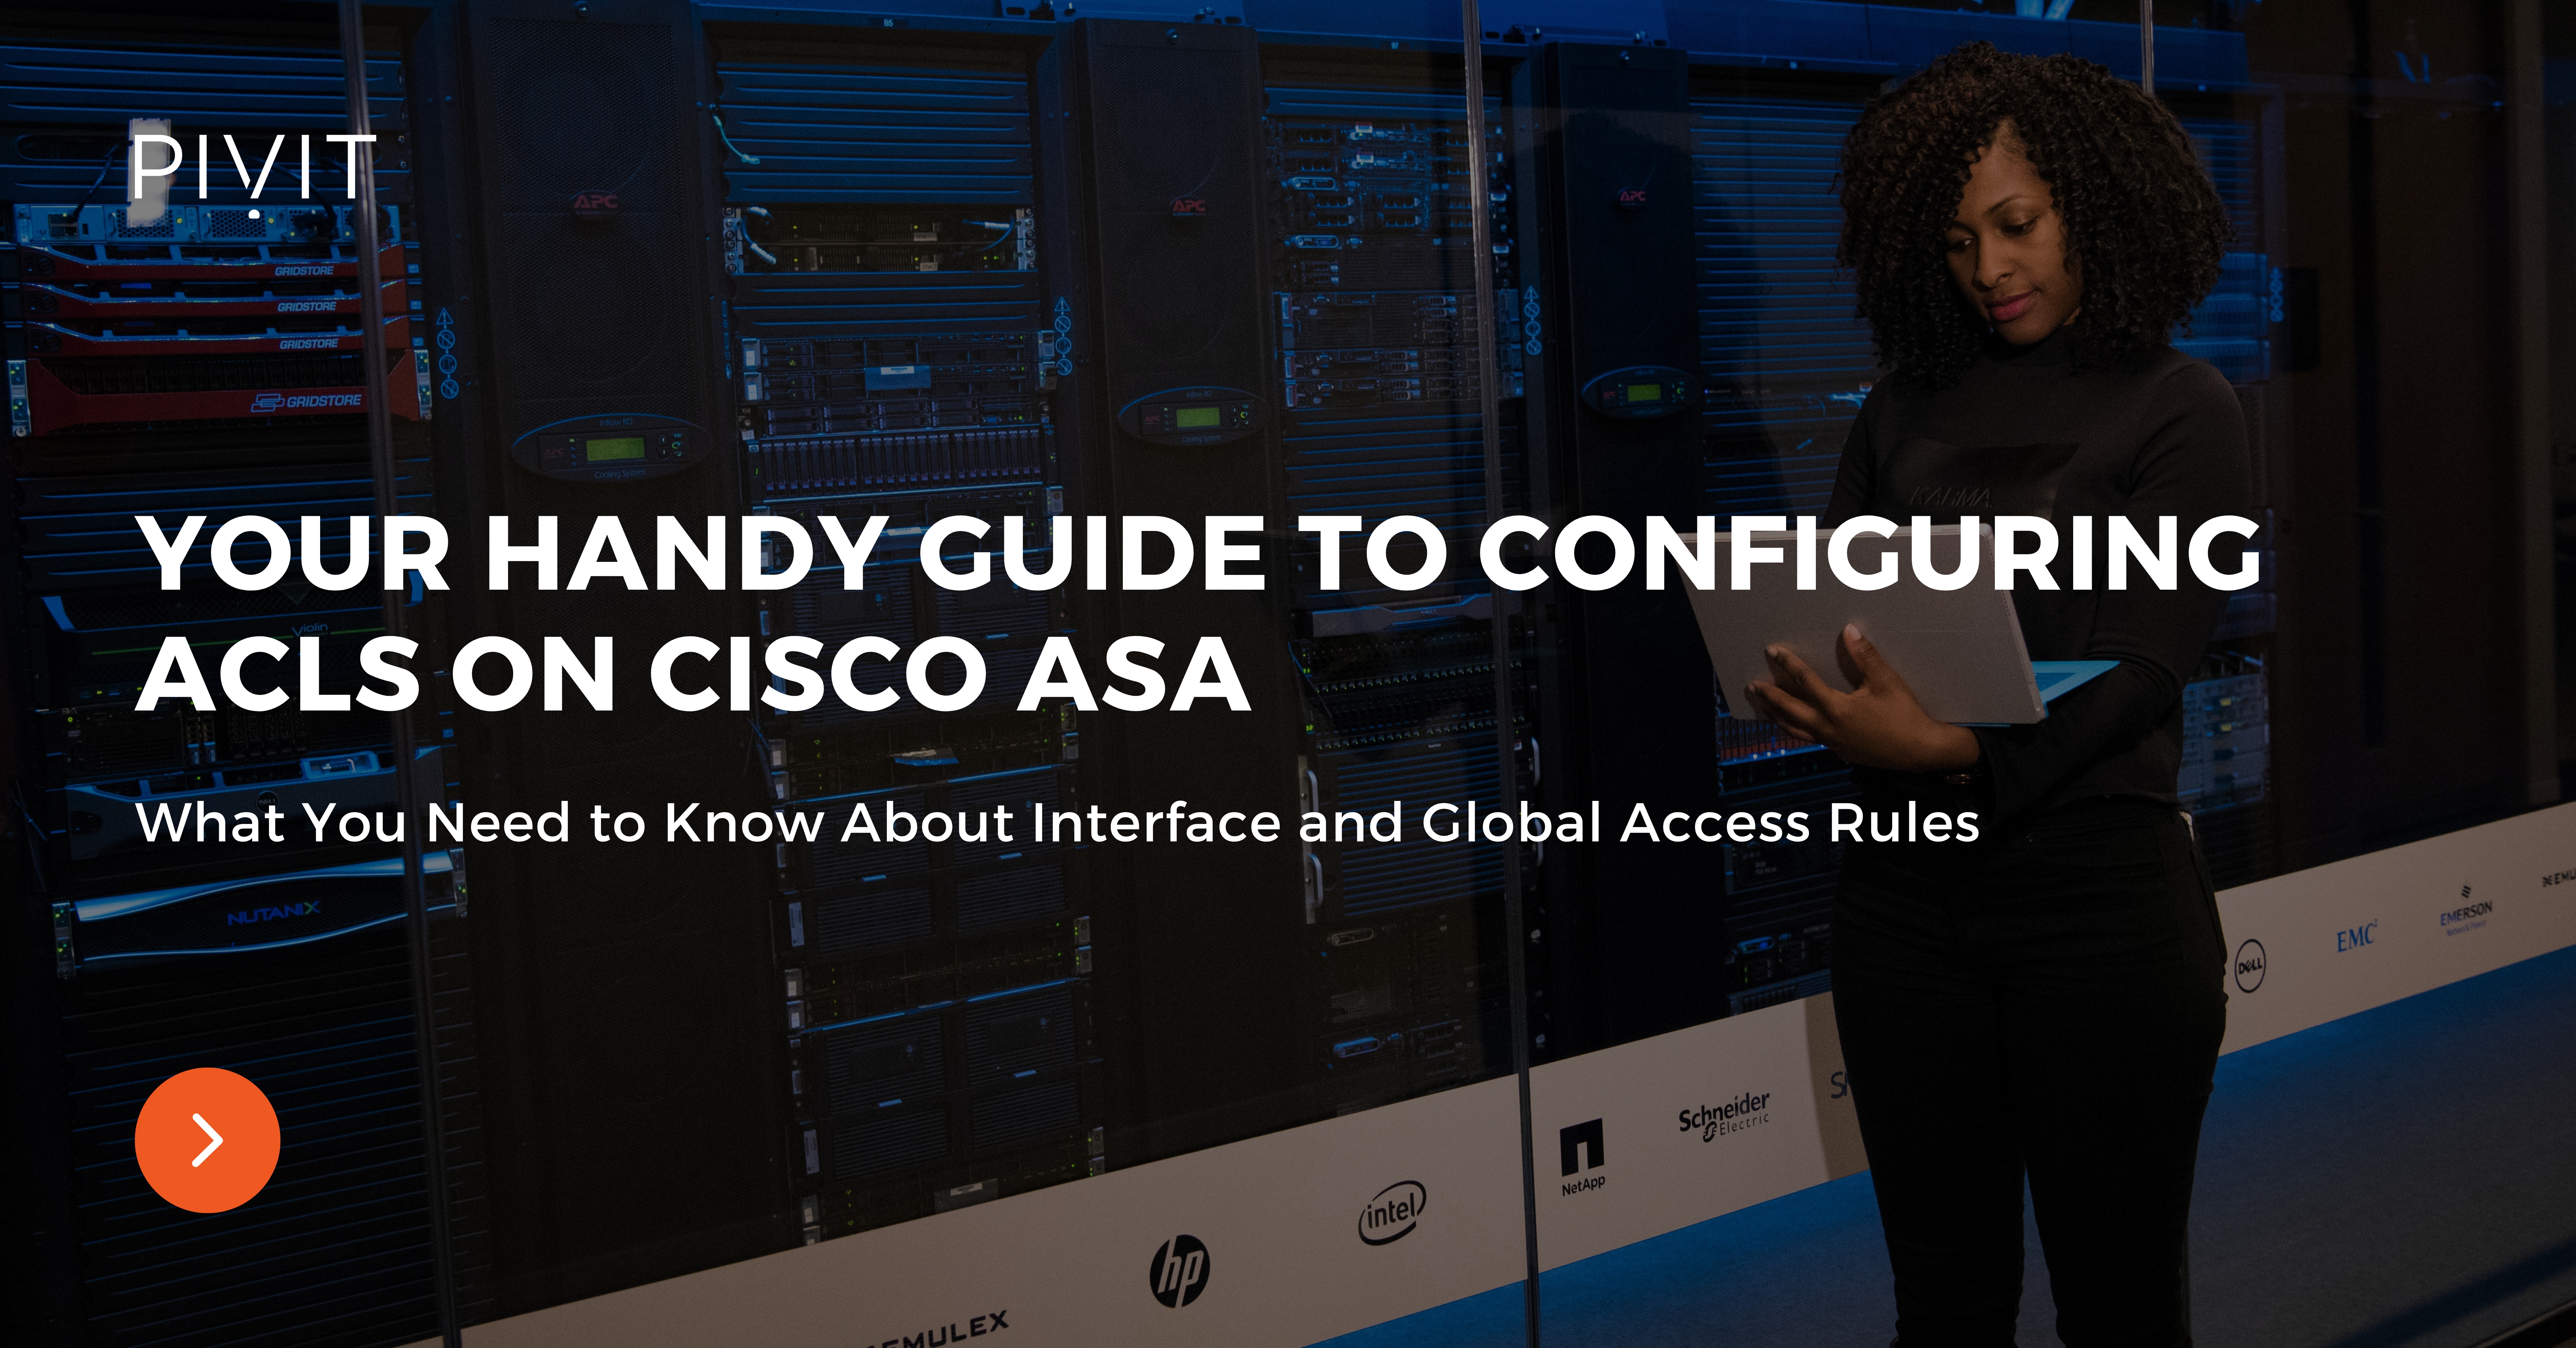 Your Handy Guide to Configuring ACLs on Cisco ASA